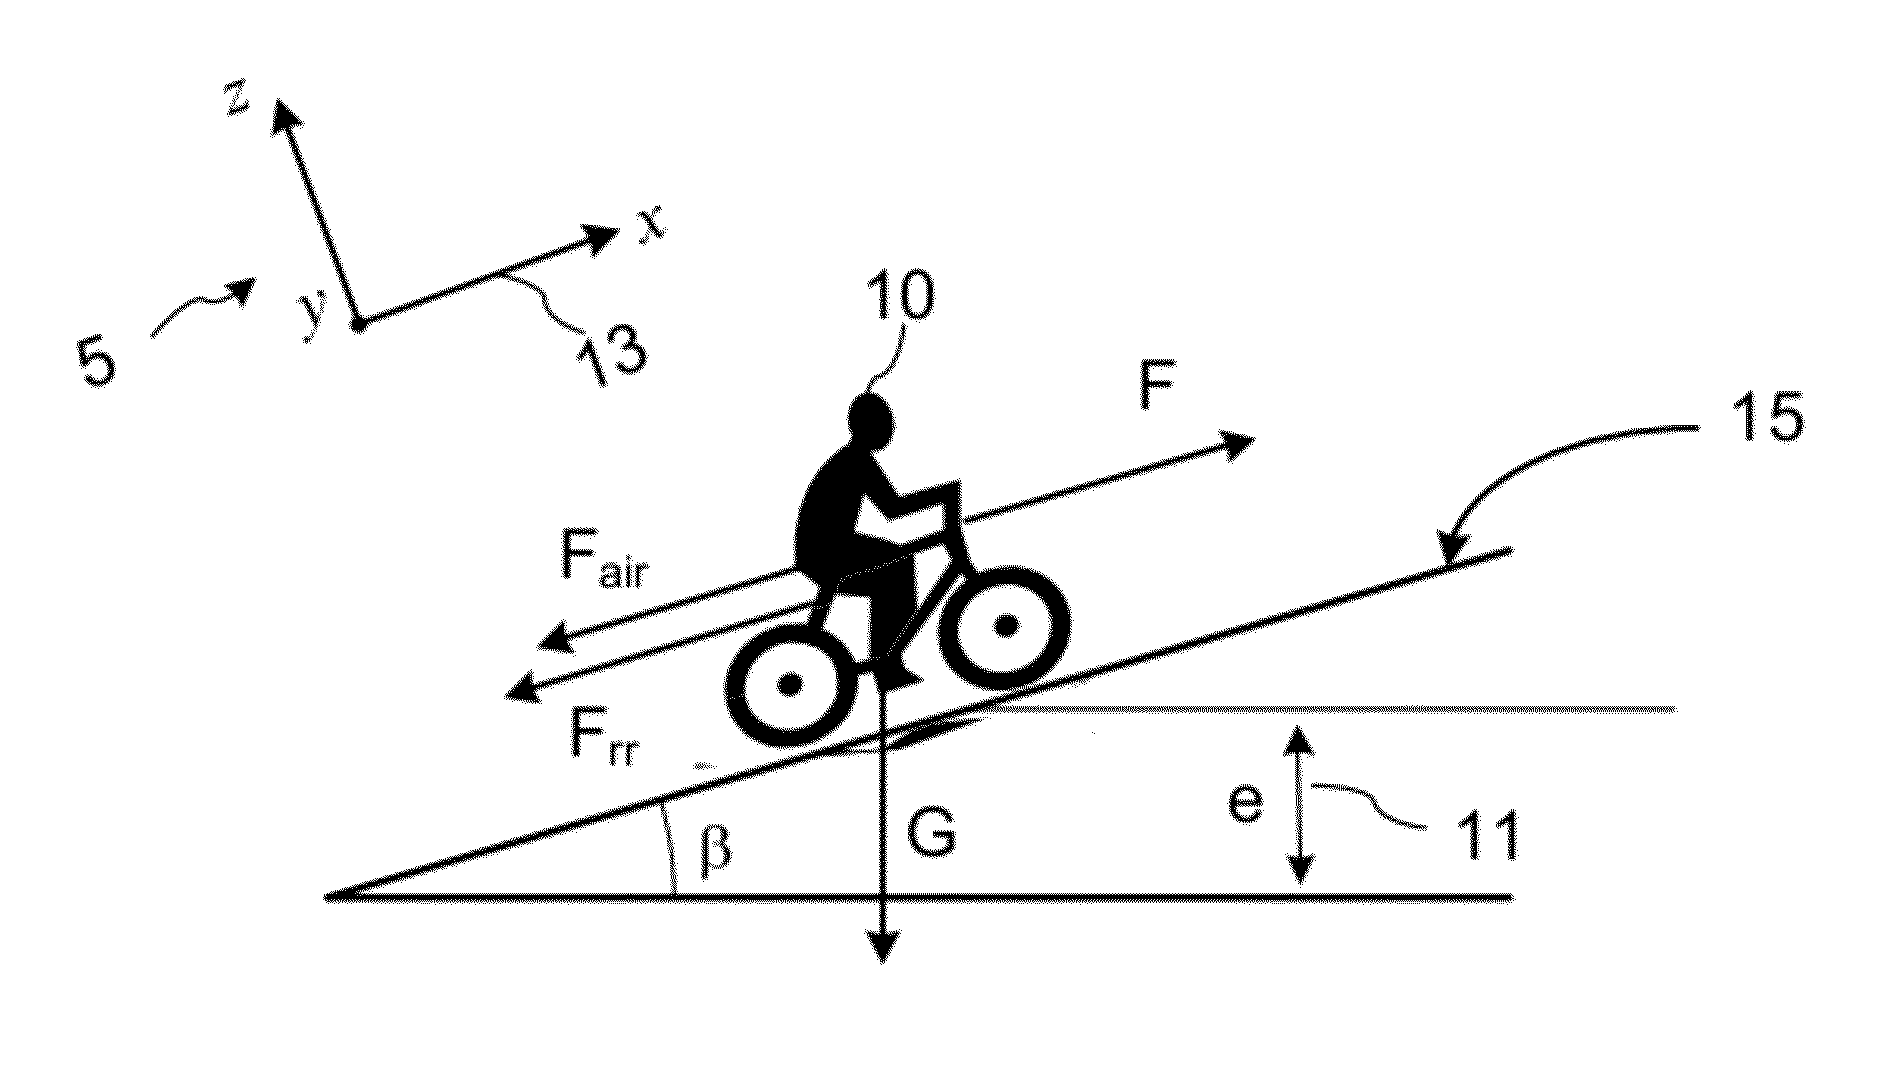 Determining angular dependence of aerodynamic drag area for a vehicle